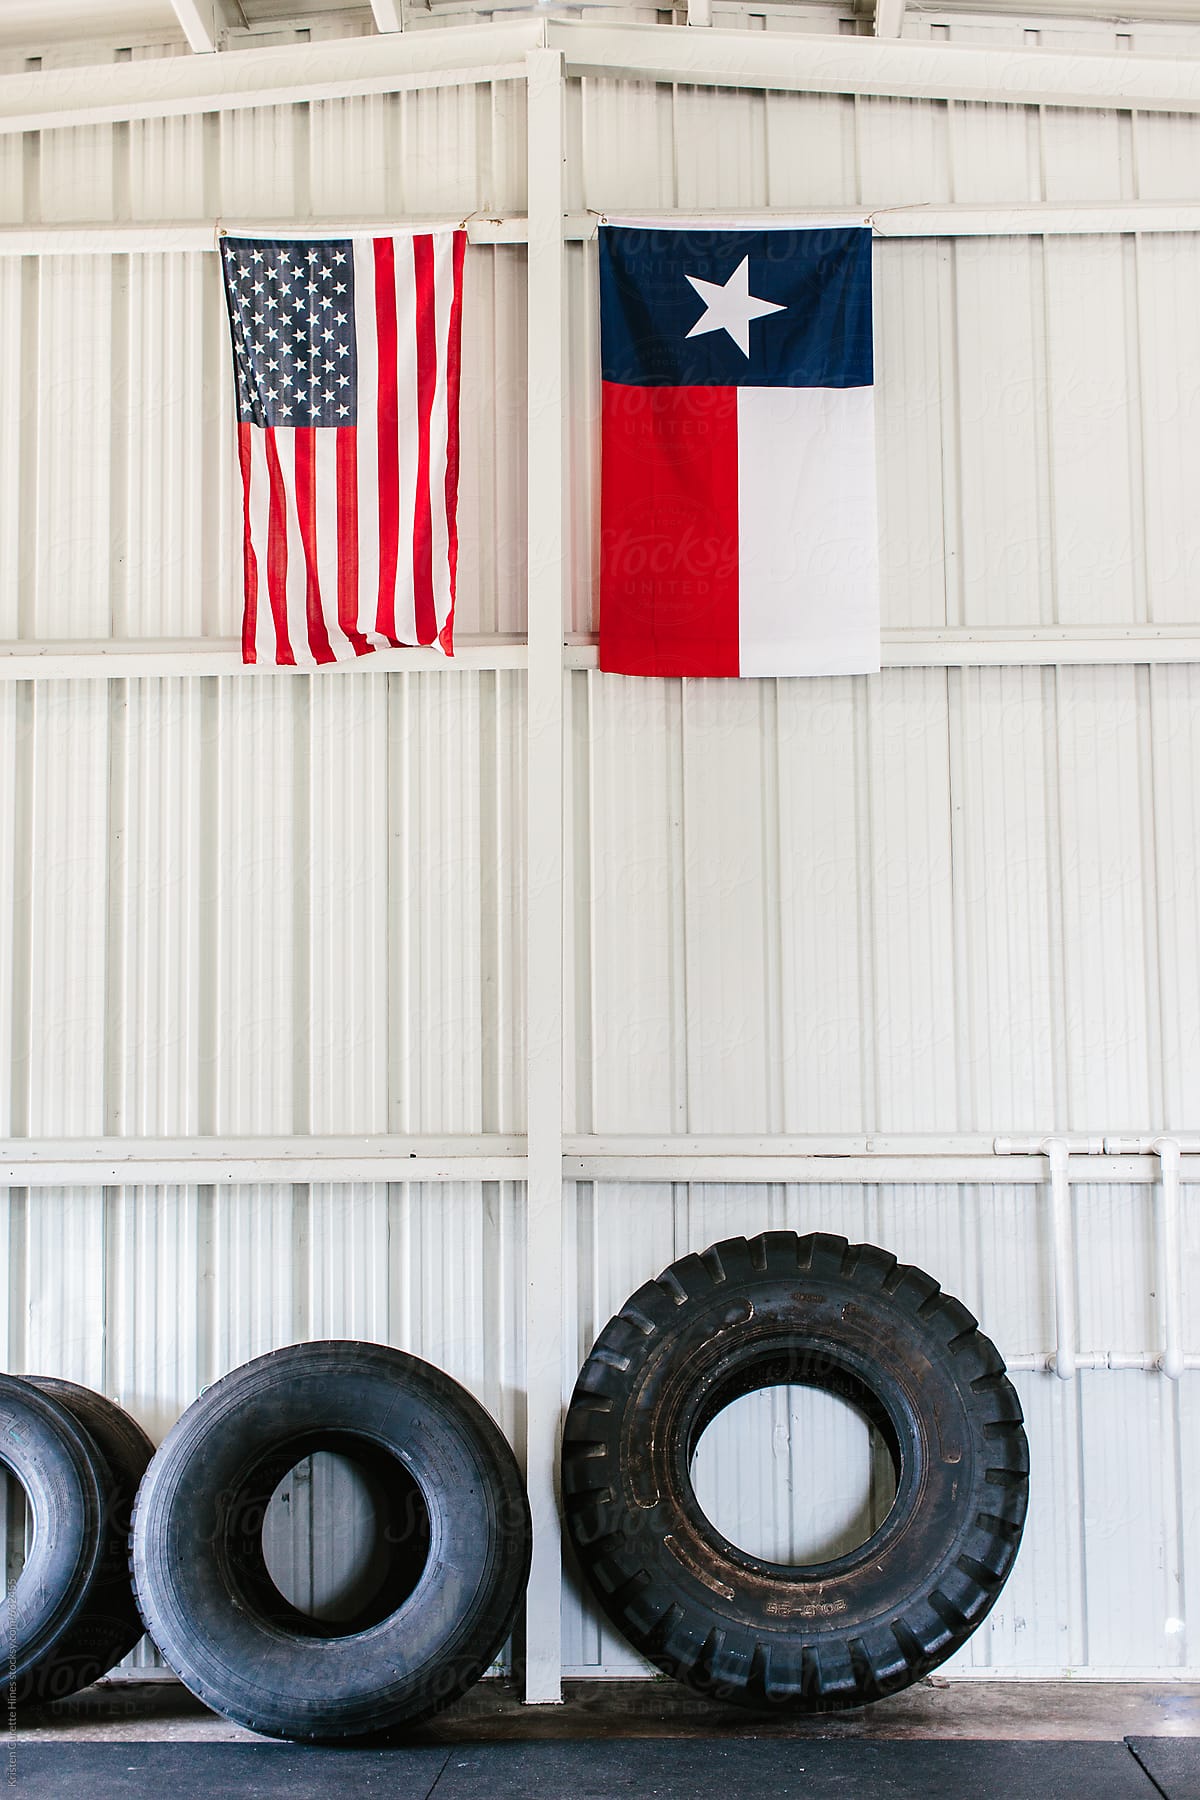 An indoor workout gym with tires lined on the wall and an American flag